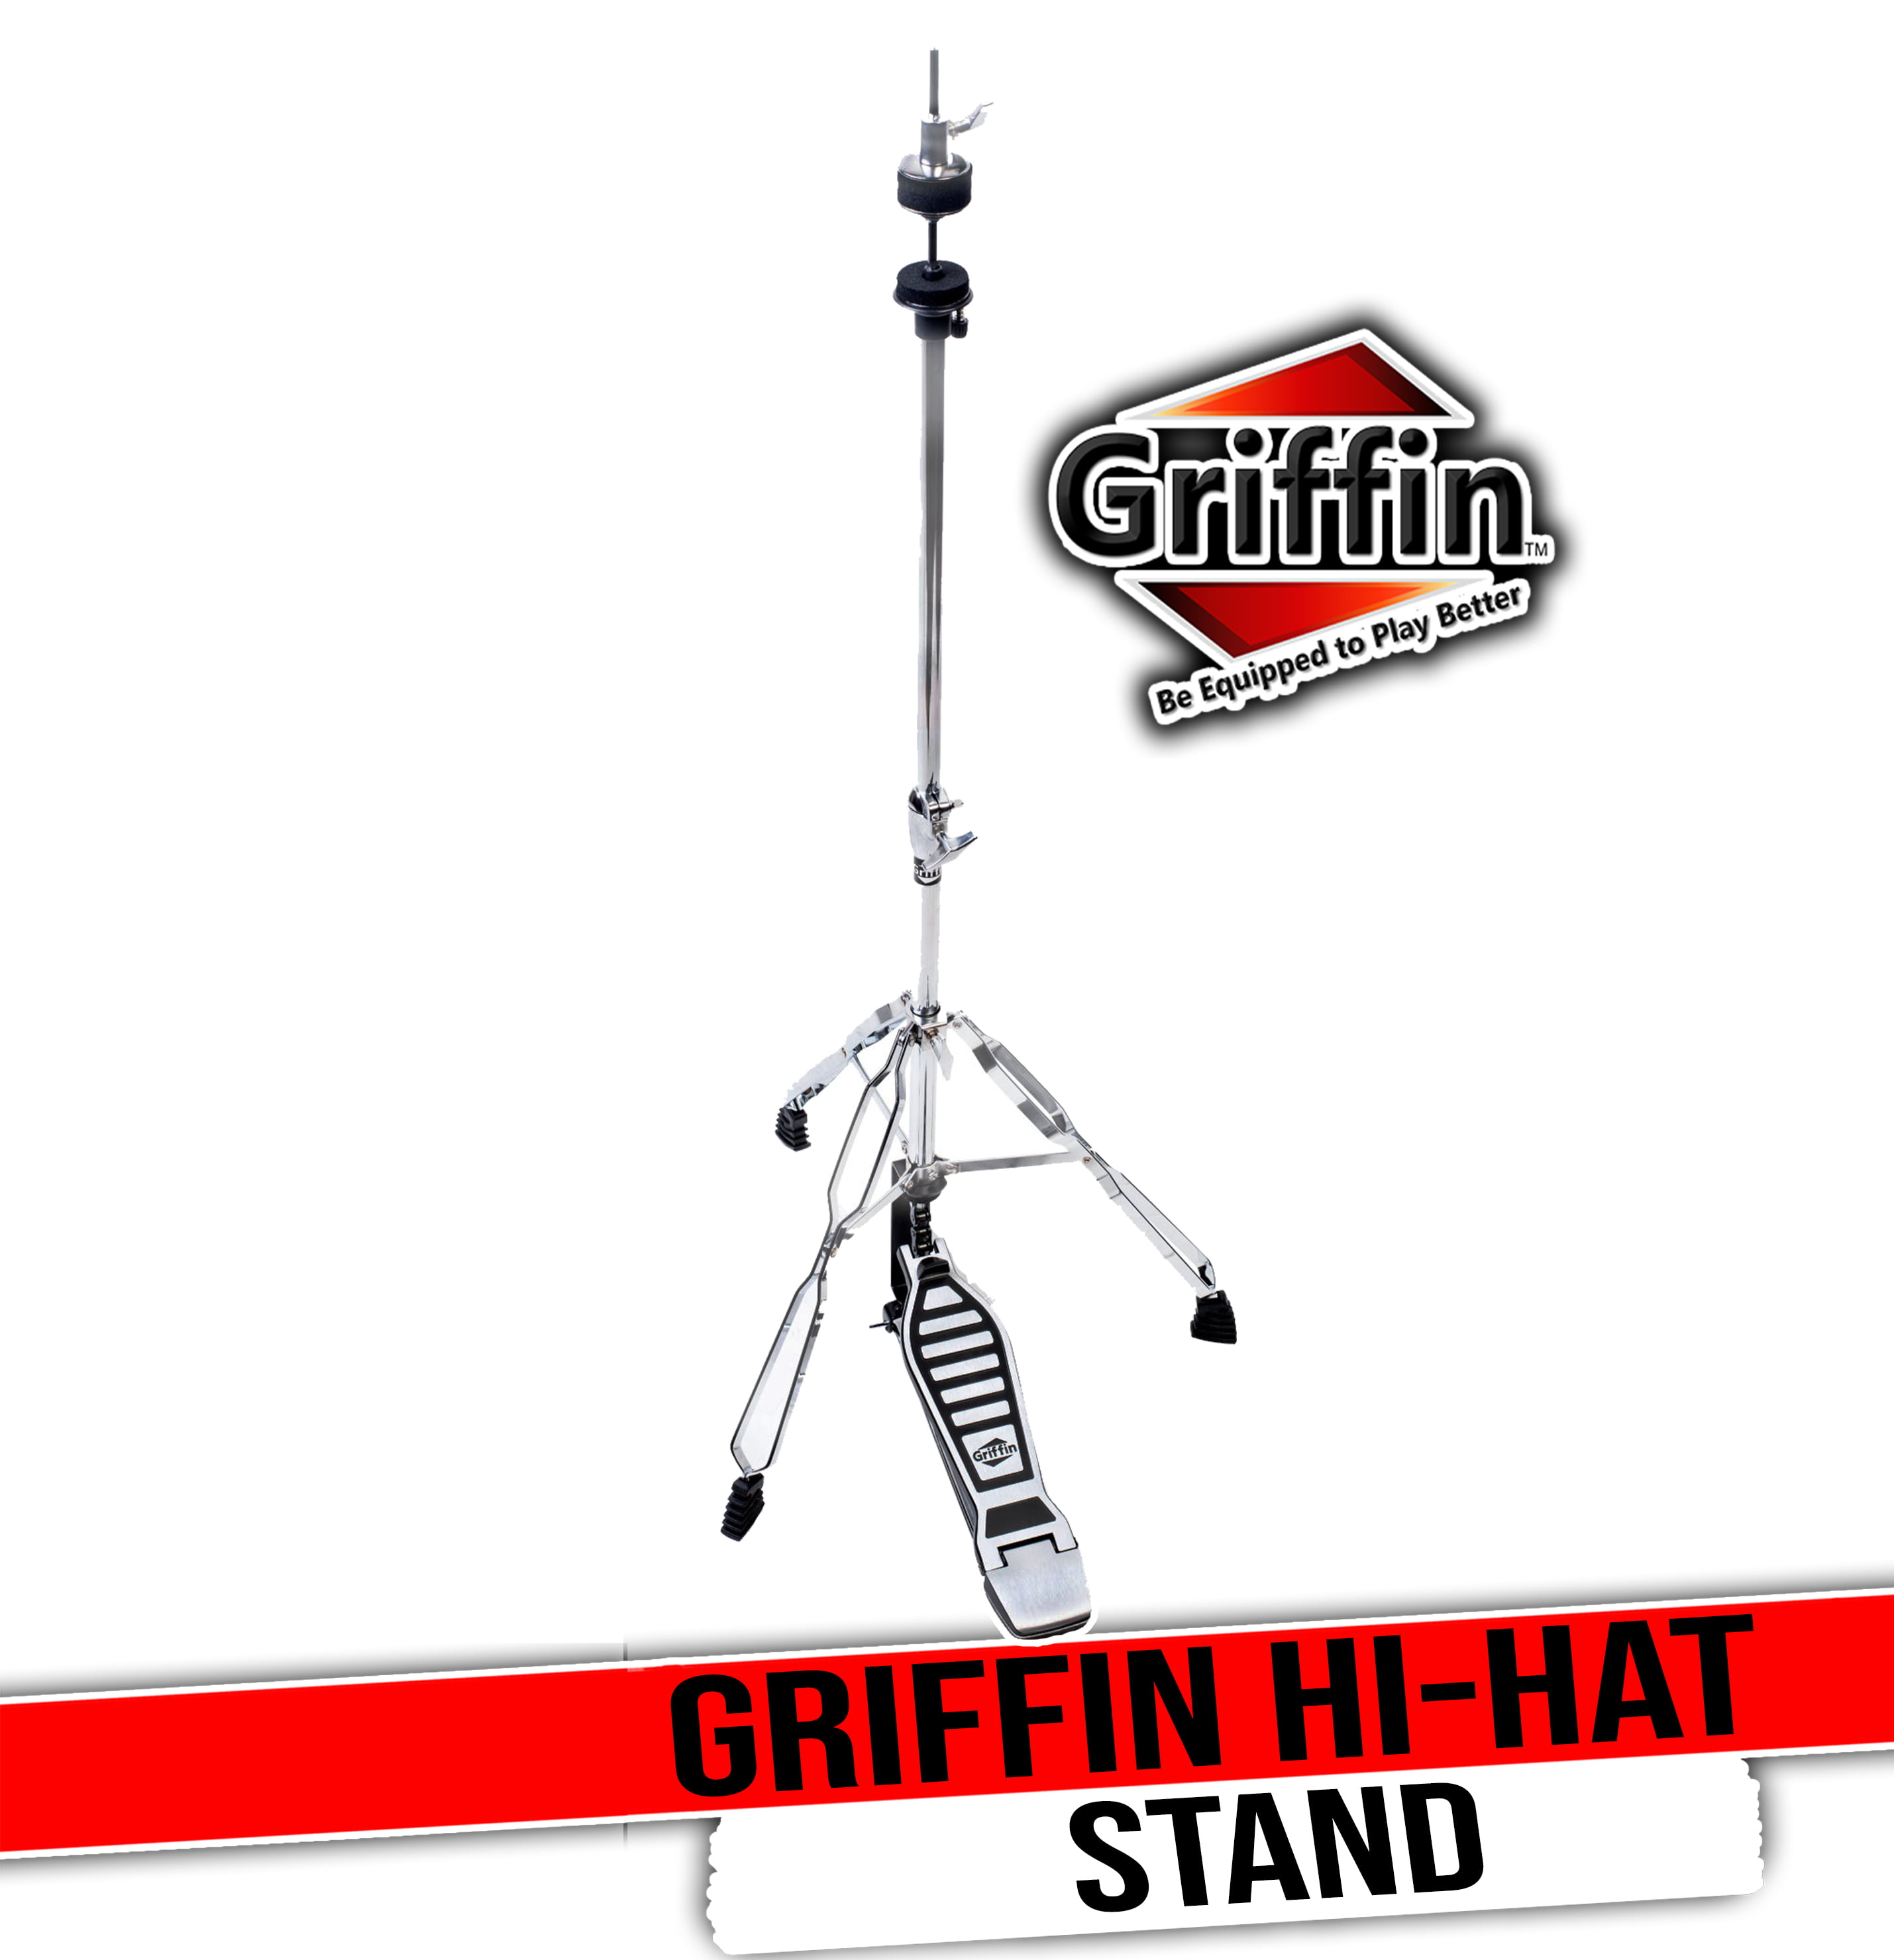 Deluxe Hi-Hat Stand by Griffin HiHat Mount with Double Braced Hardware Accessory Set|Adjustable High Hat Holder Ideal for Mobile Percussion Drummers|Chrome Finish Hi Hat Cymbal Pedal With Drum Key 